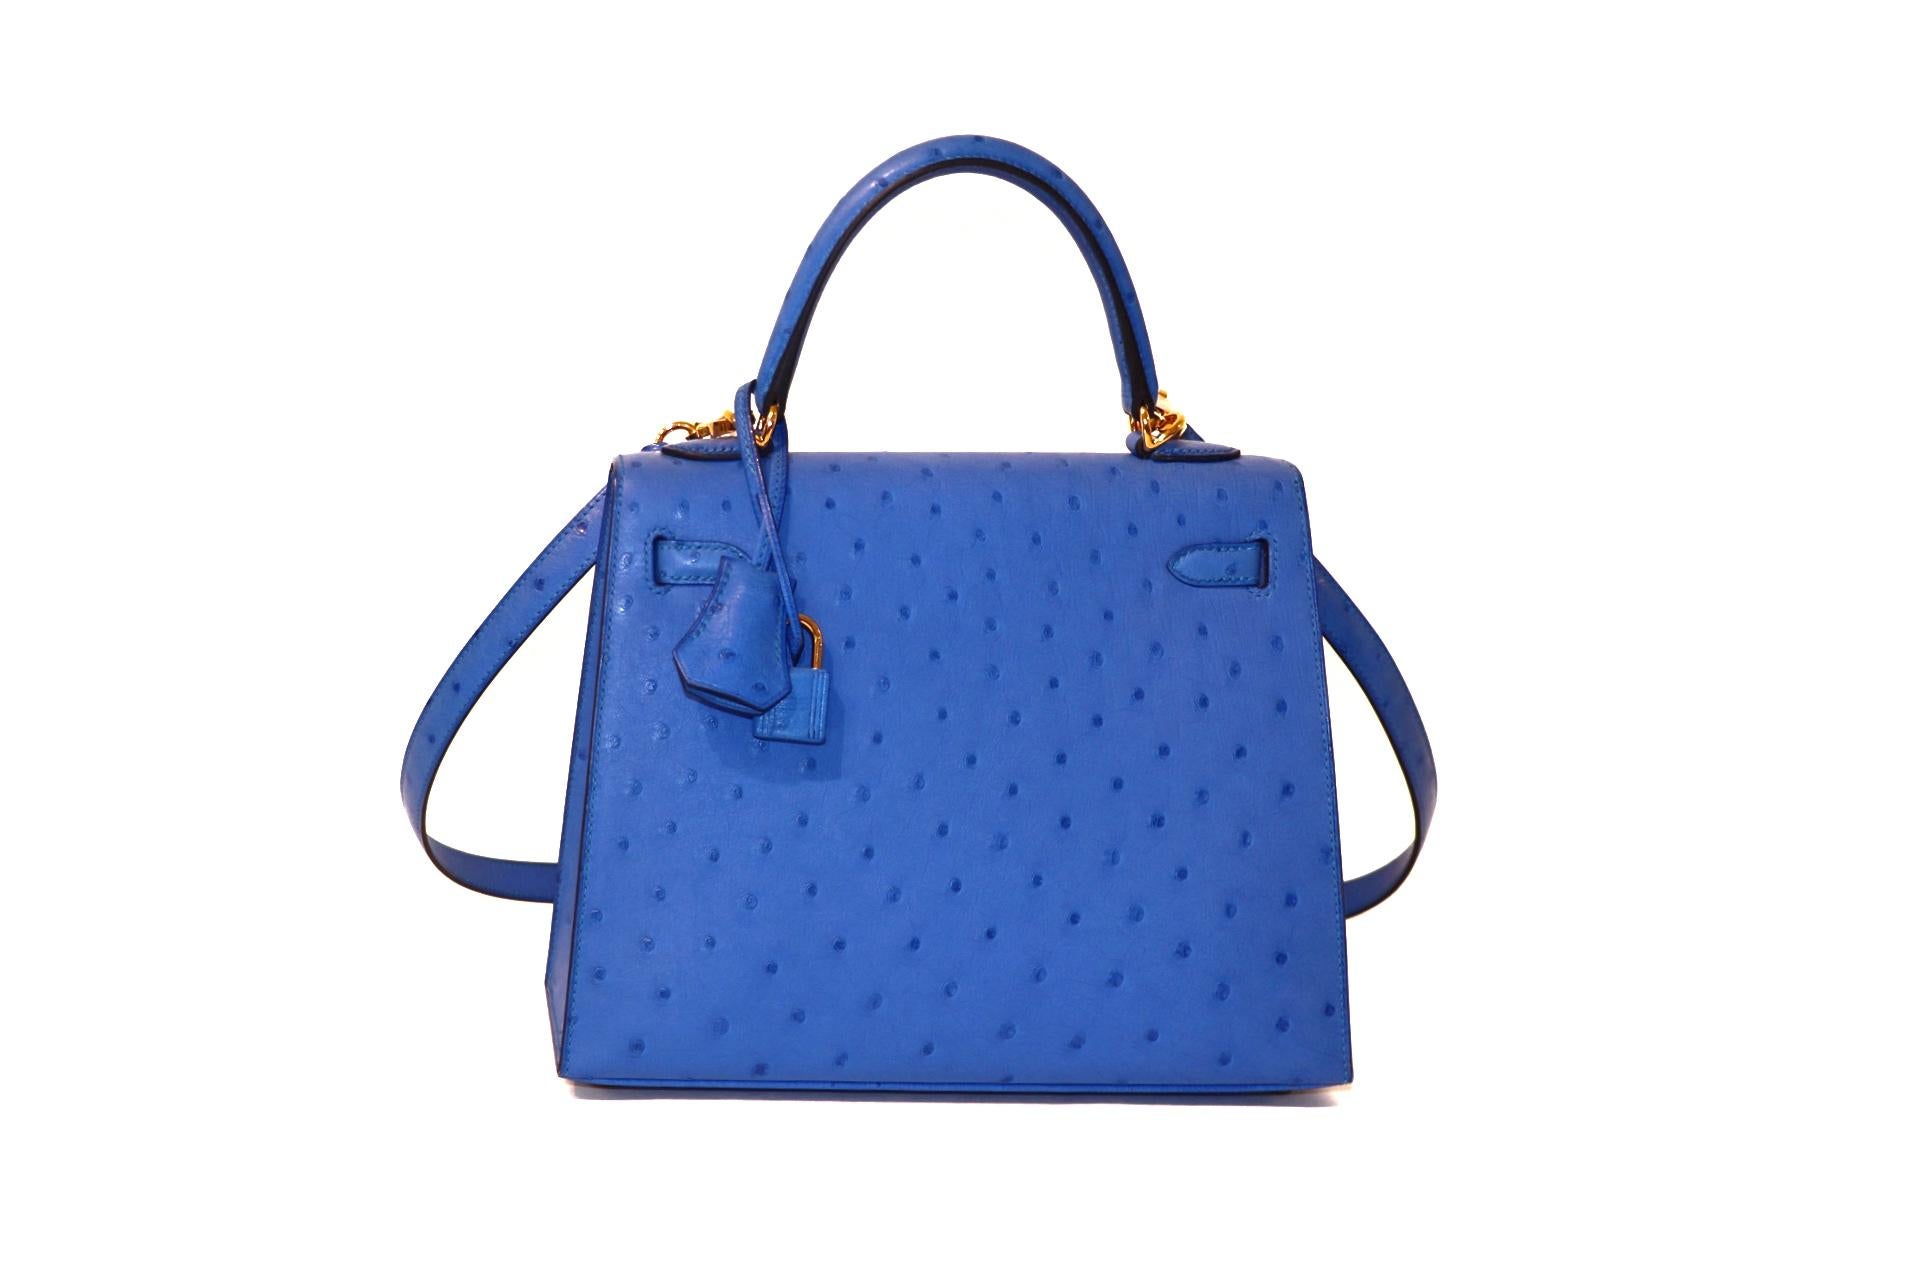 This authentic Hermès Bleuet Ostrich 28 cm Kelly is in PRISTINE unworn condition.  The protective plastic remains intact on the hardware.   Hermès bags are considered the ultimate luxury item worldwide.  Each piece is handcrafted with waitlists that